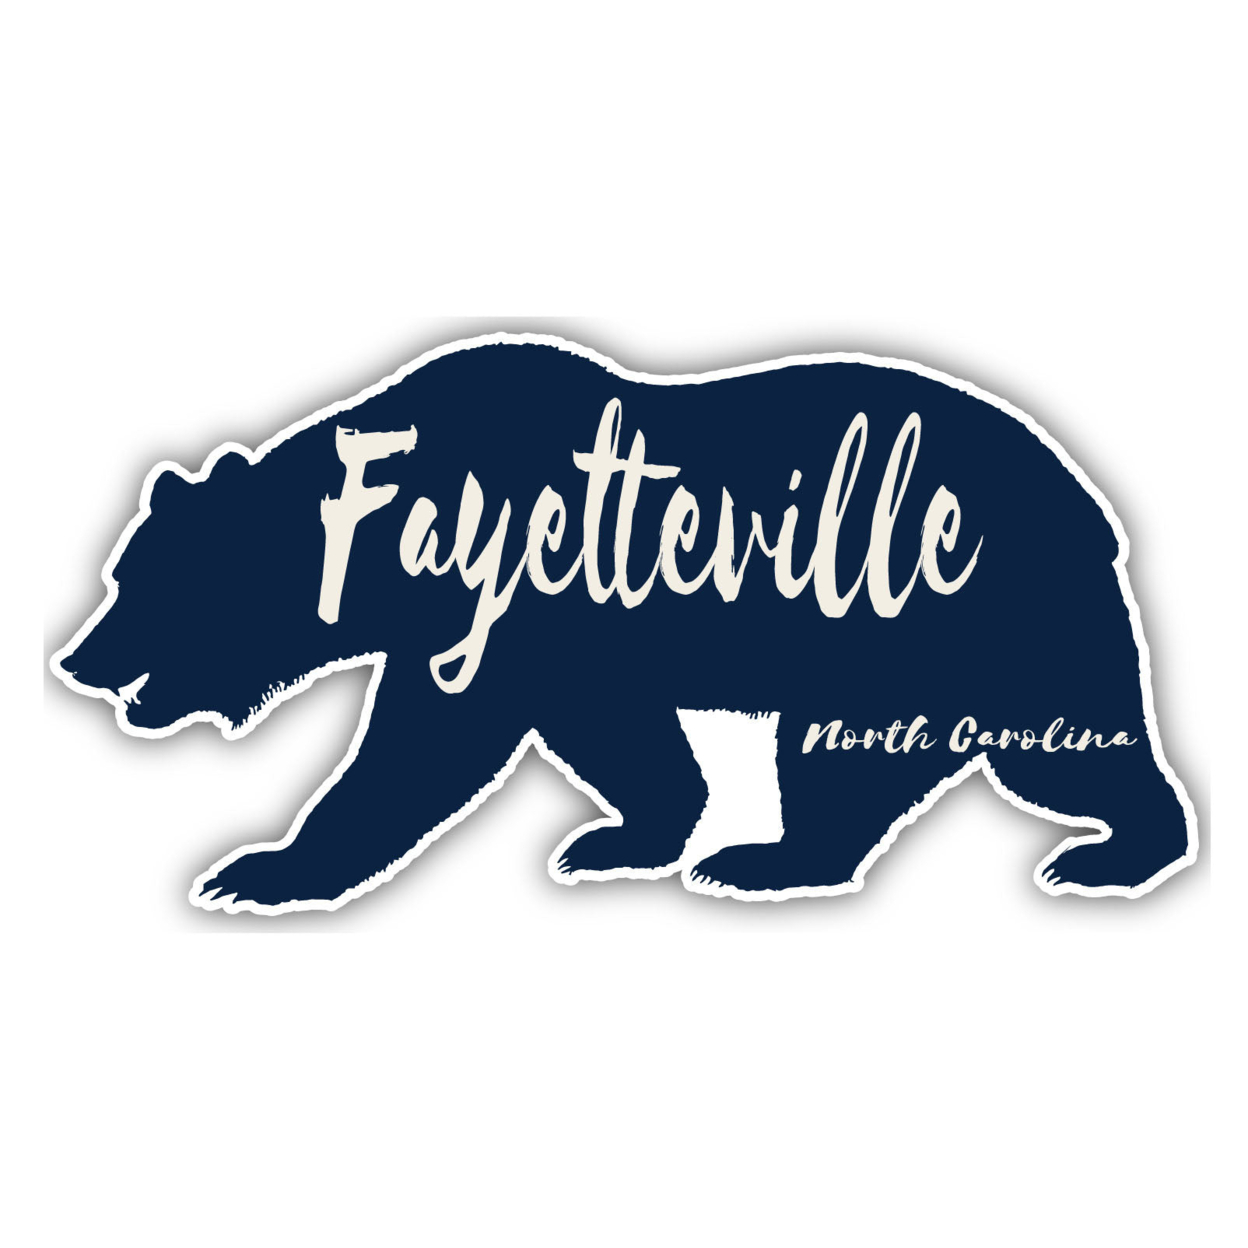 Fayetteville North Carolina Souvenir Decorative Stickers (Choose Theme And Size) - 4-Pack, 12-Inch, Bear